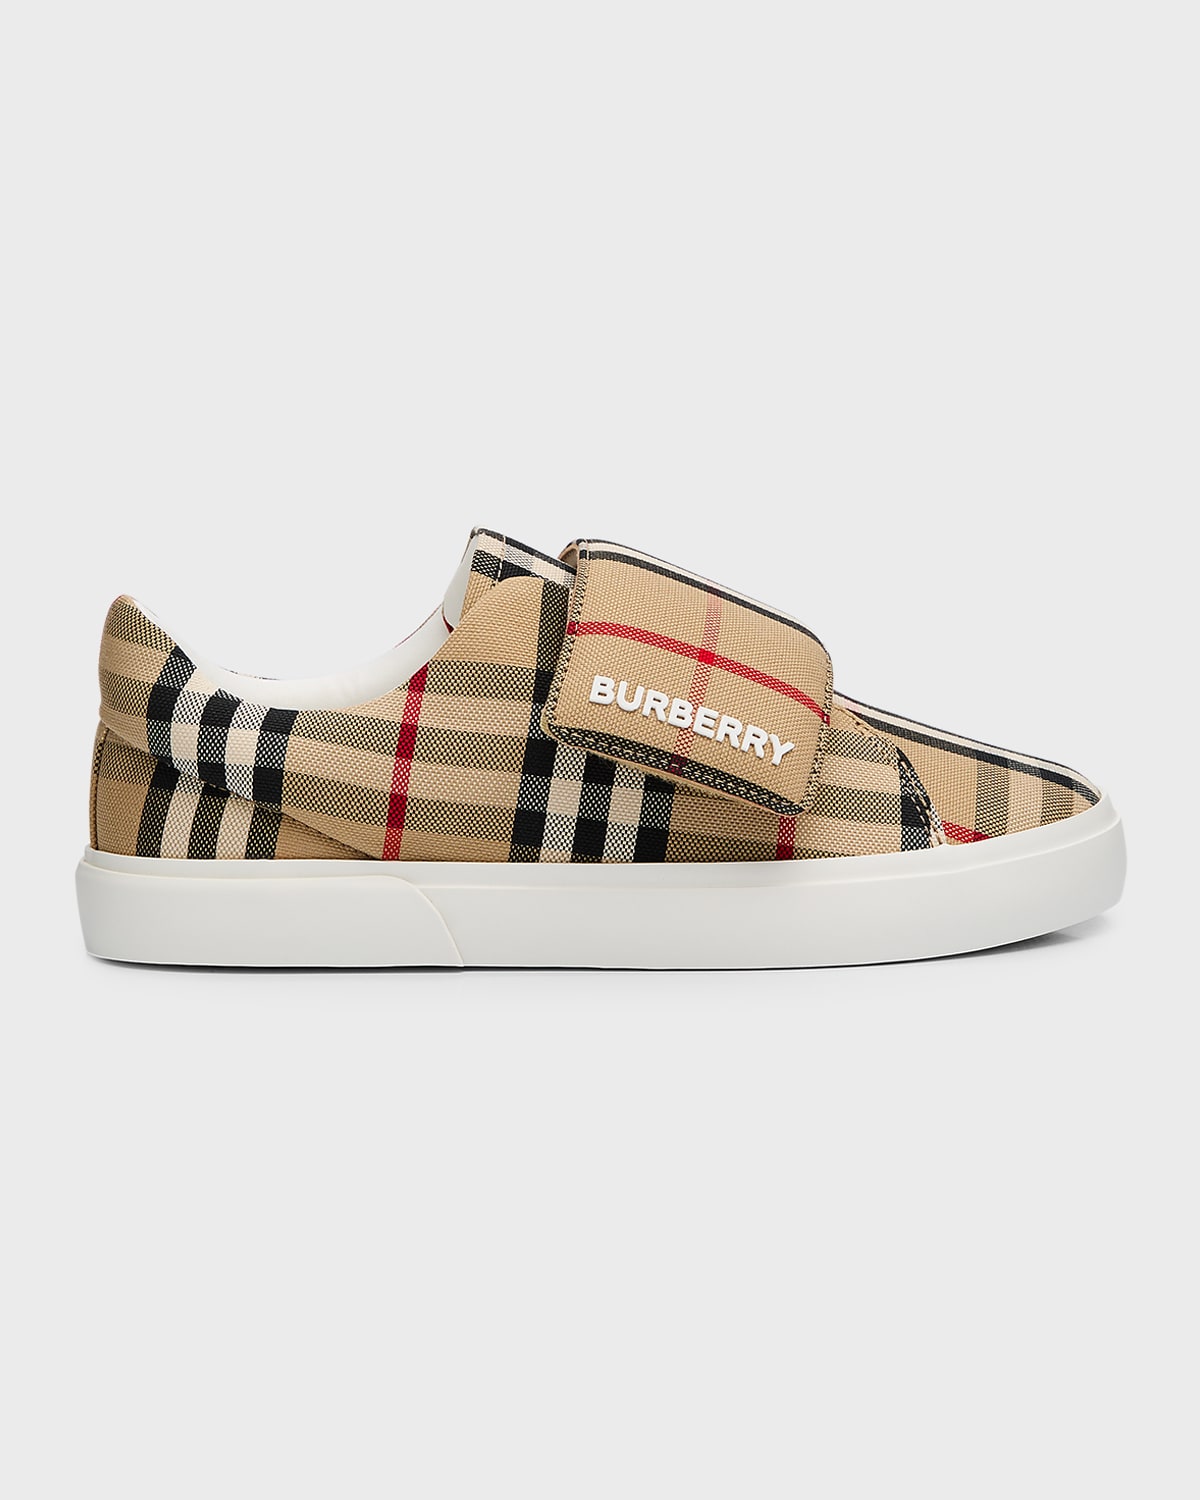 BURBERRY KID'S JAMES CHECK-PRINT trainers, TODDLERS/KIDS